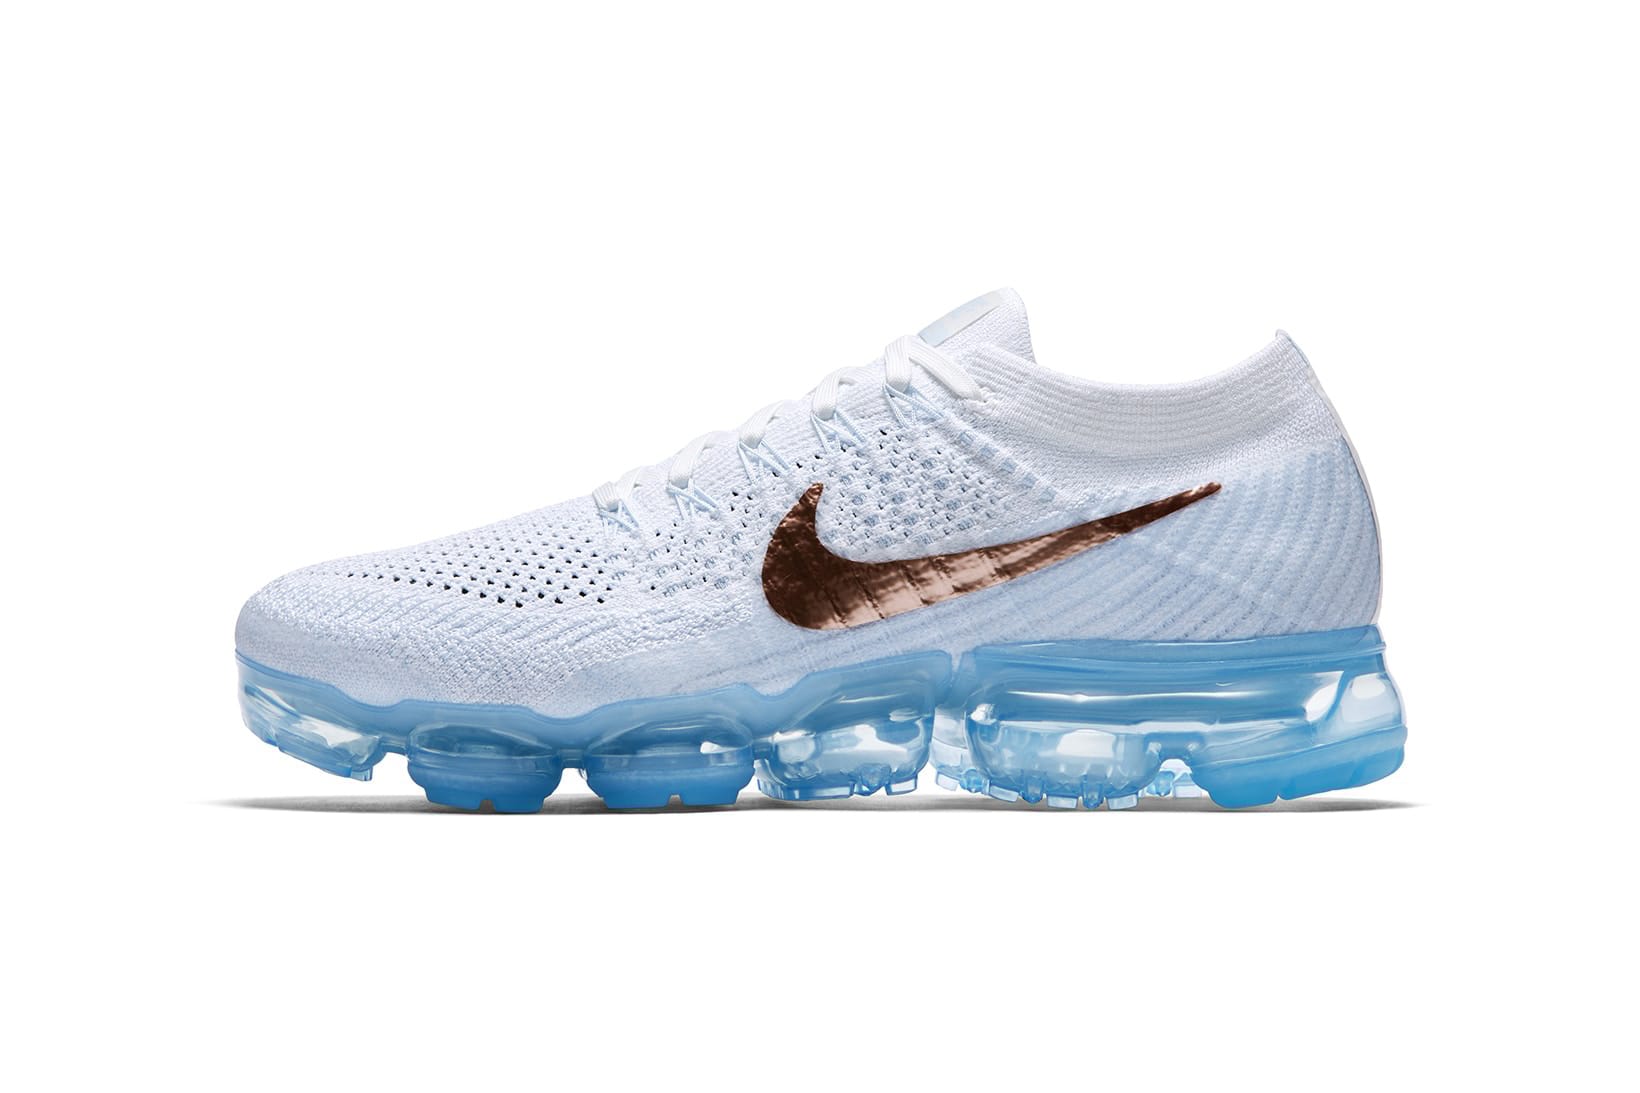 vapormax icy blue